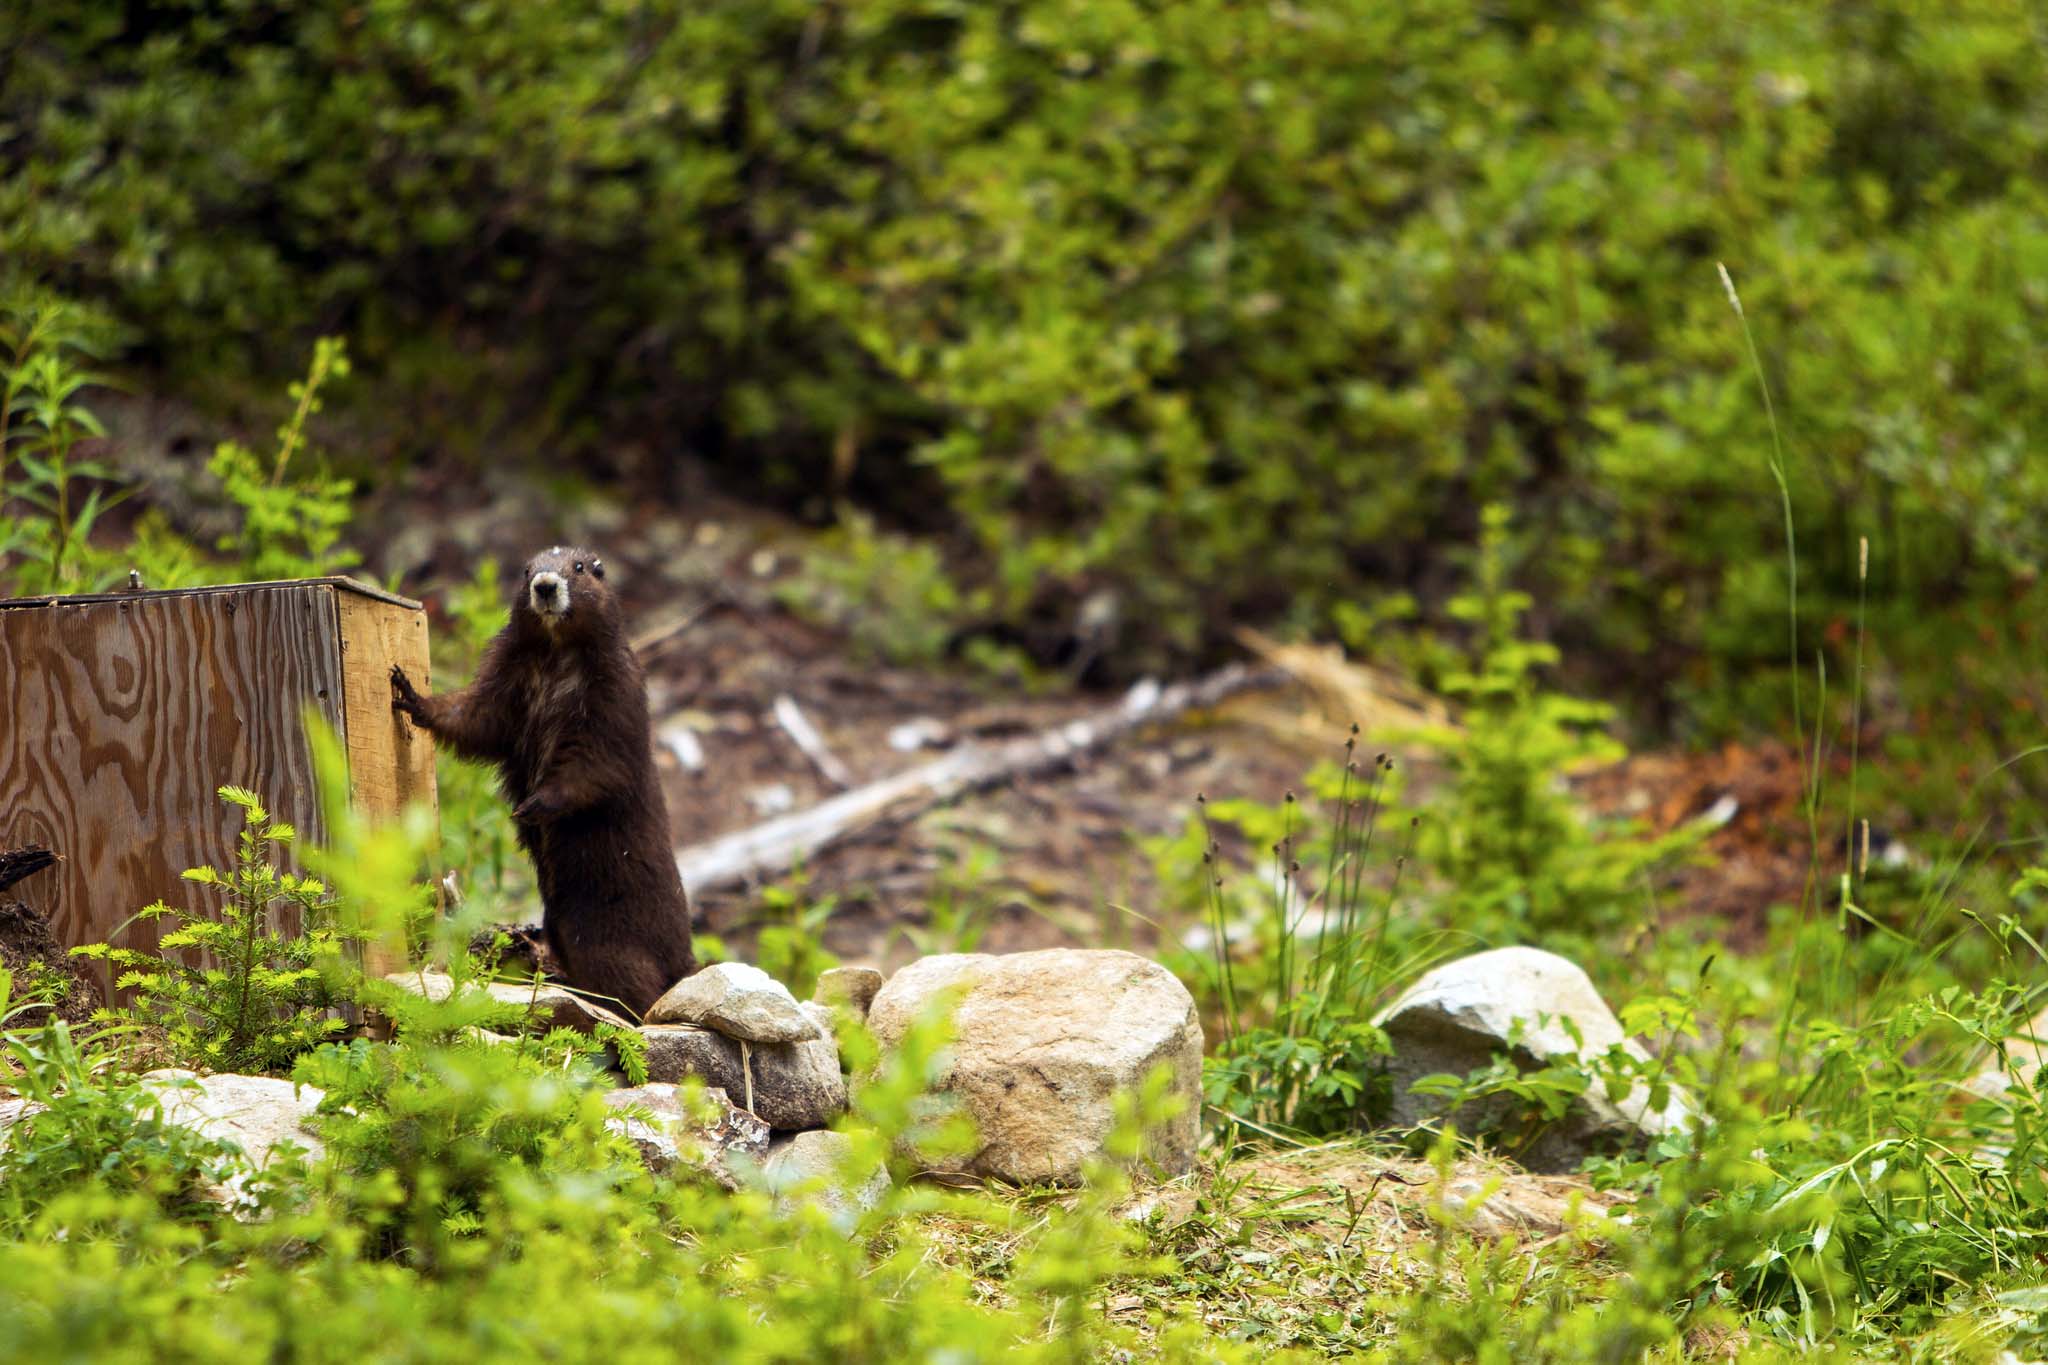 A marmot with an inquisitive look on its face standing up against a wooden box in a forest clearing